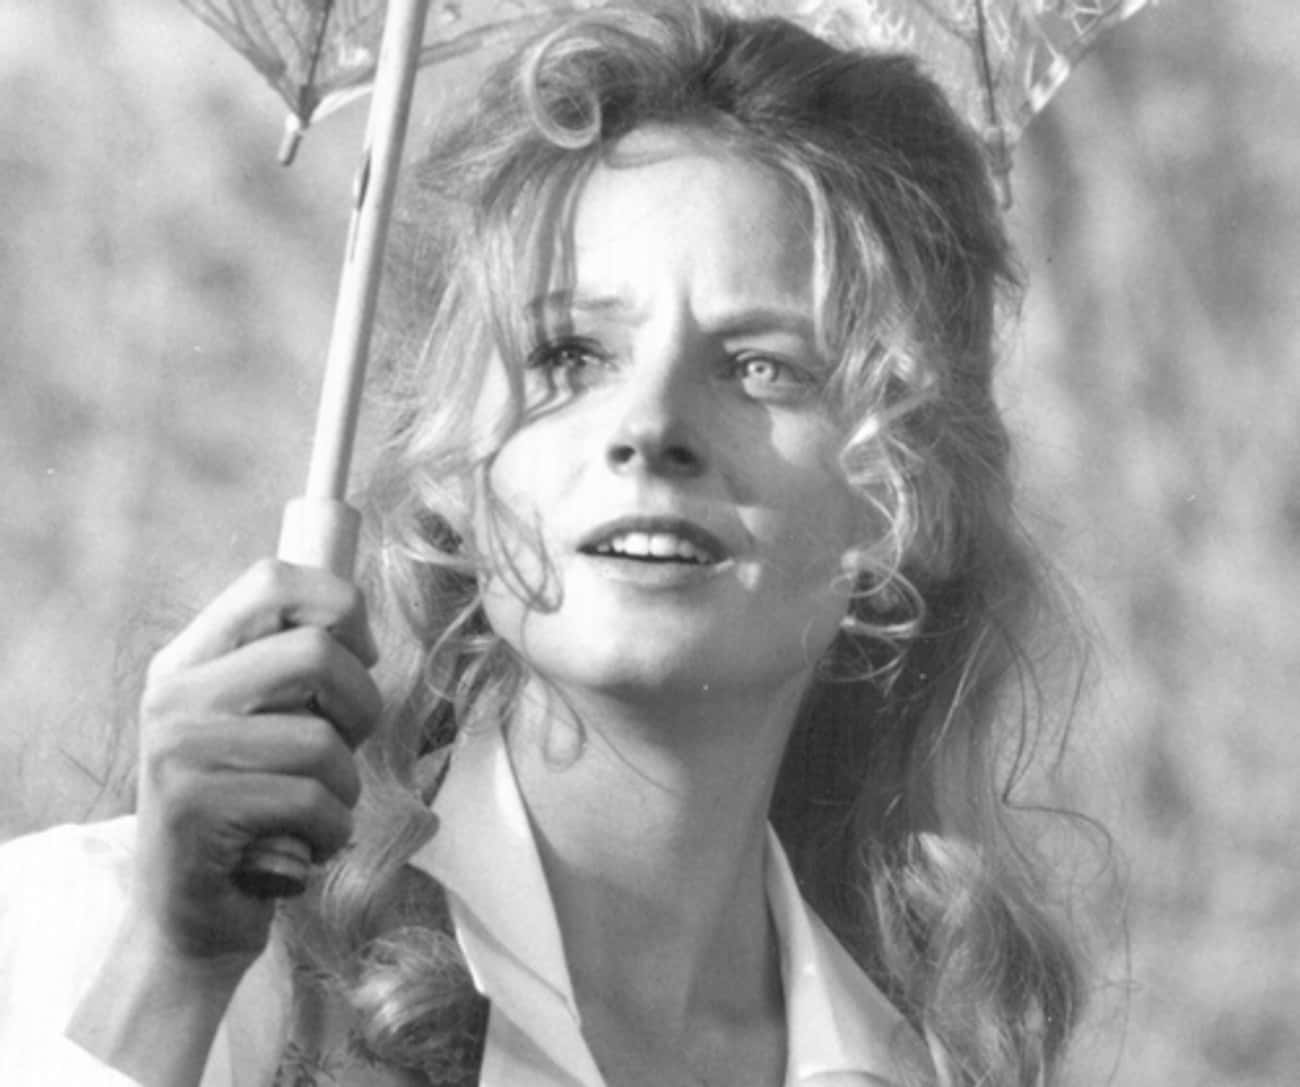 Young Jodie Foster in White Blouse Holding Umbrella